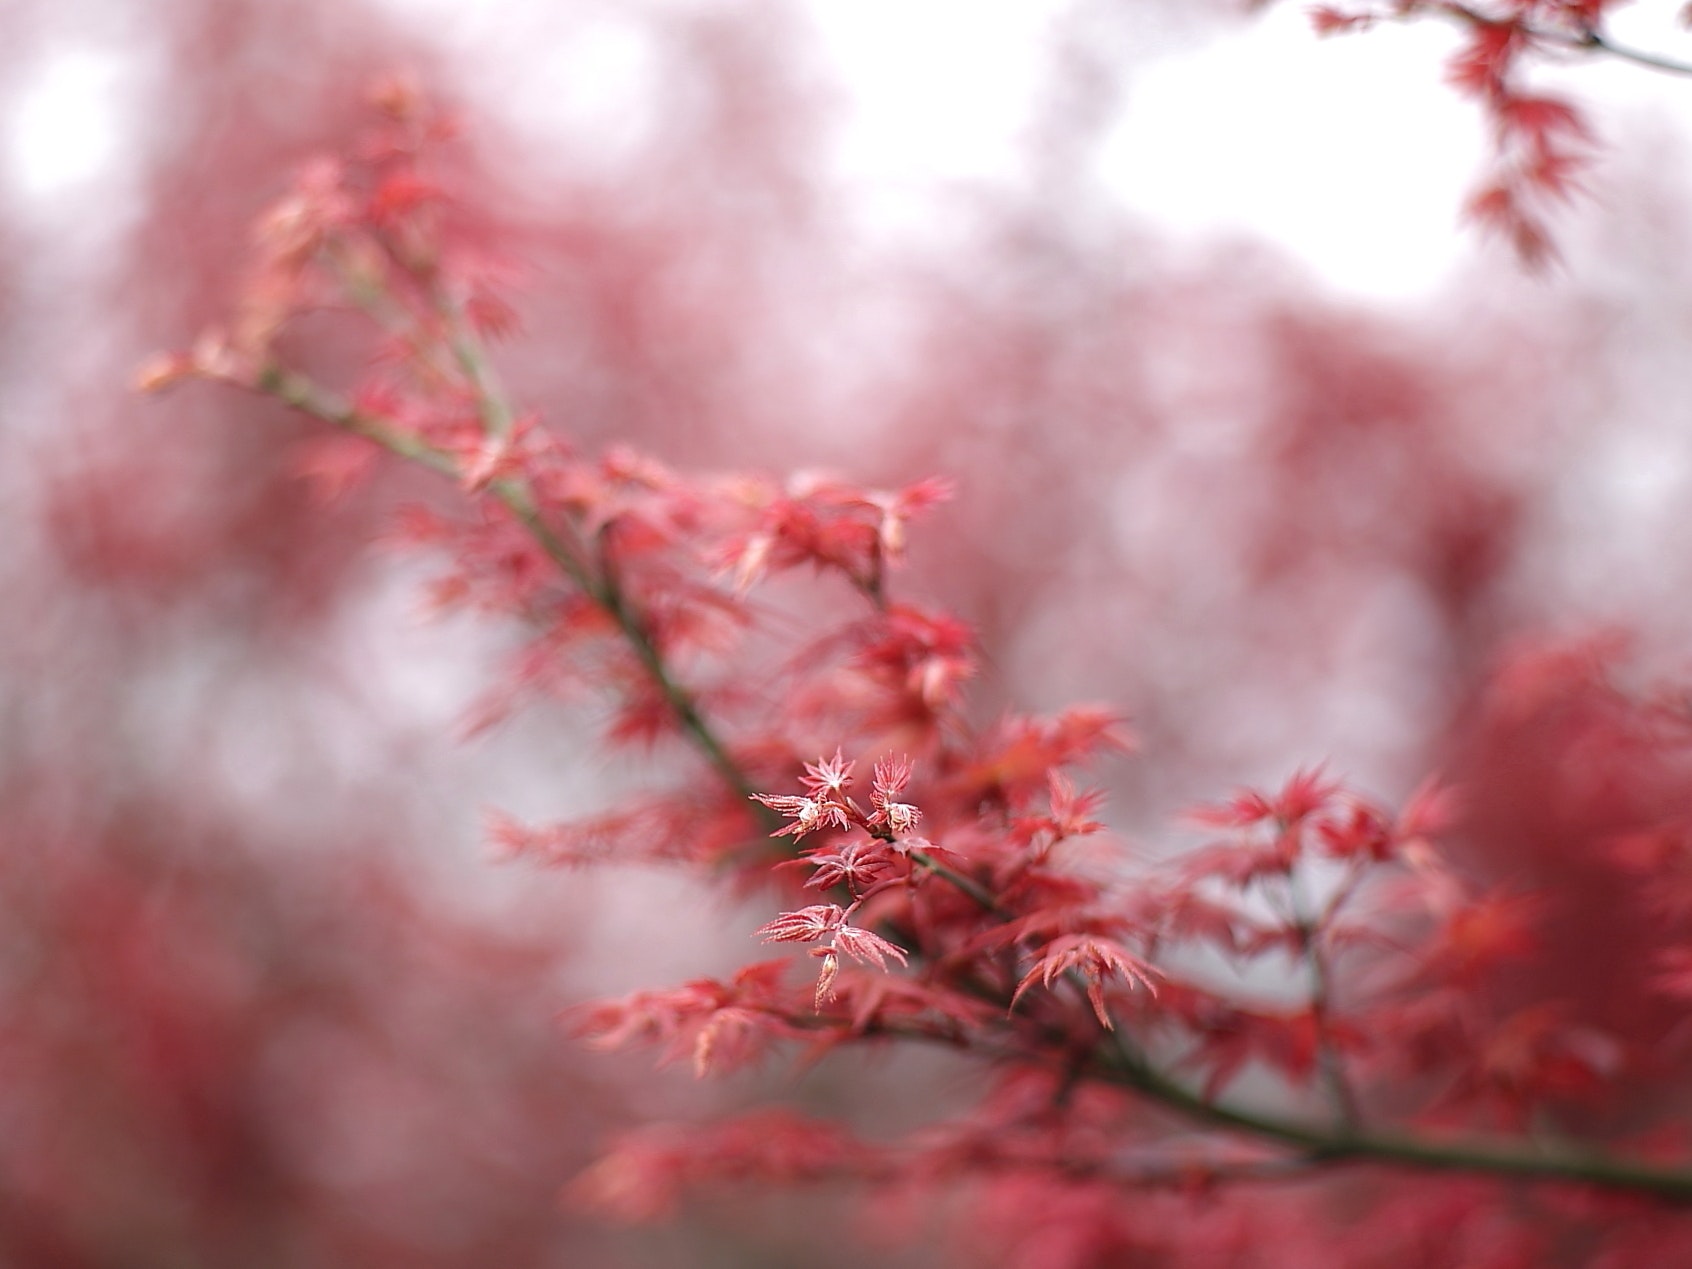 Shallow Focus of Red and White Flower, Blur, Branch, Bright, Close-up, HQ Photo